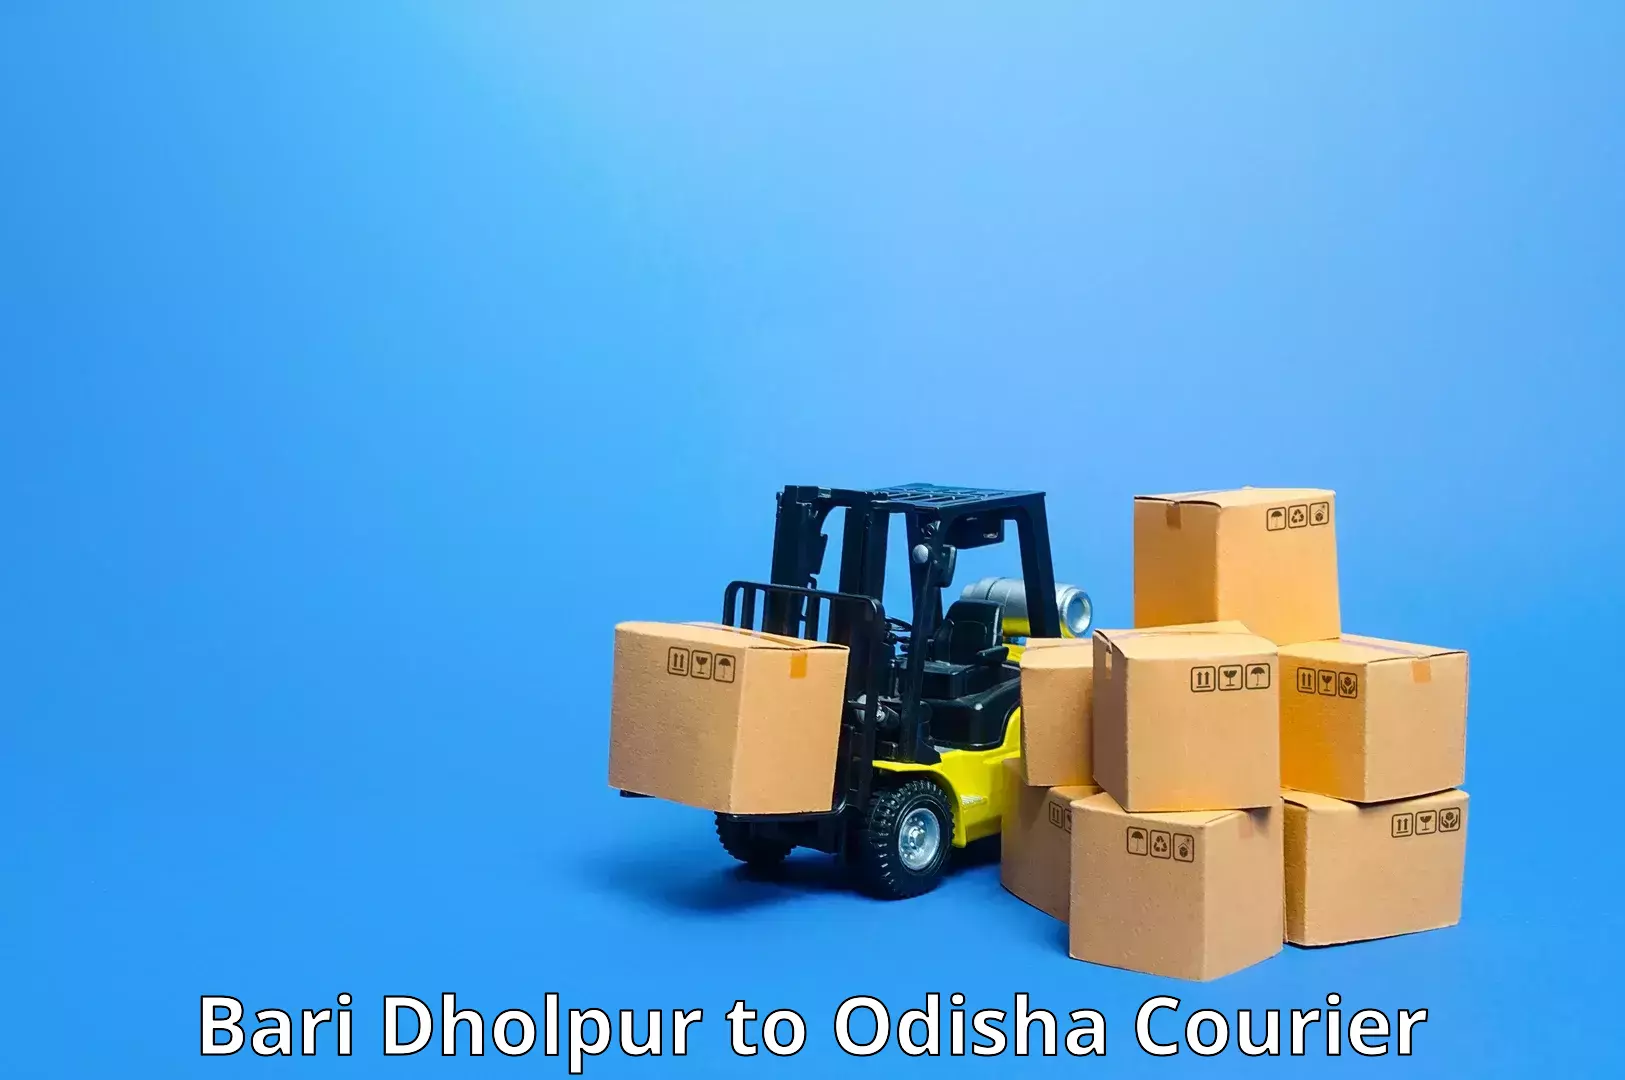 24-hour courier service Bari Dholpur to Bamra